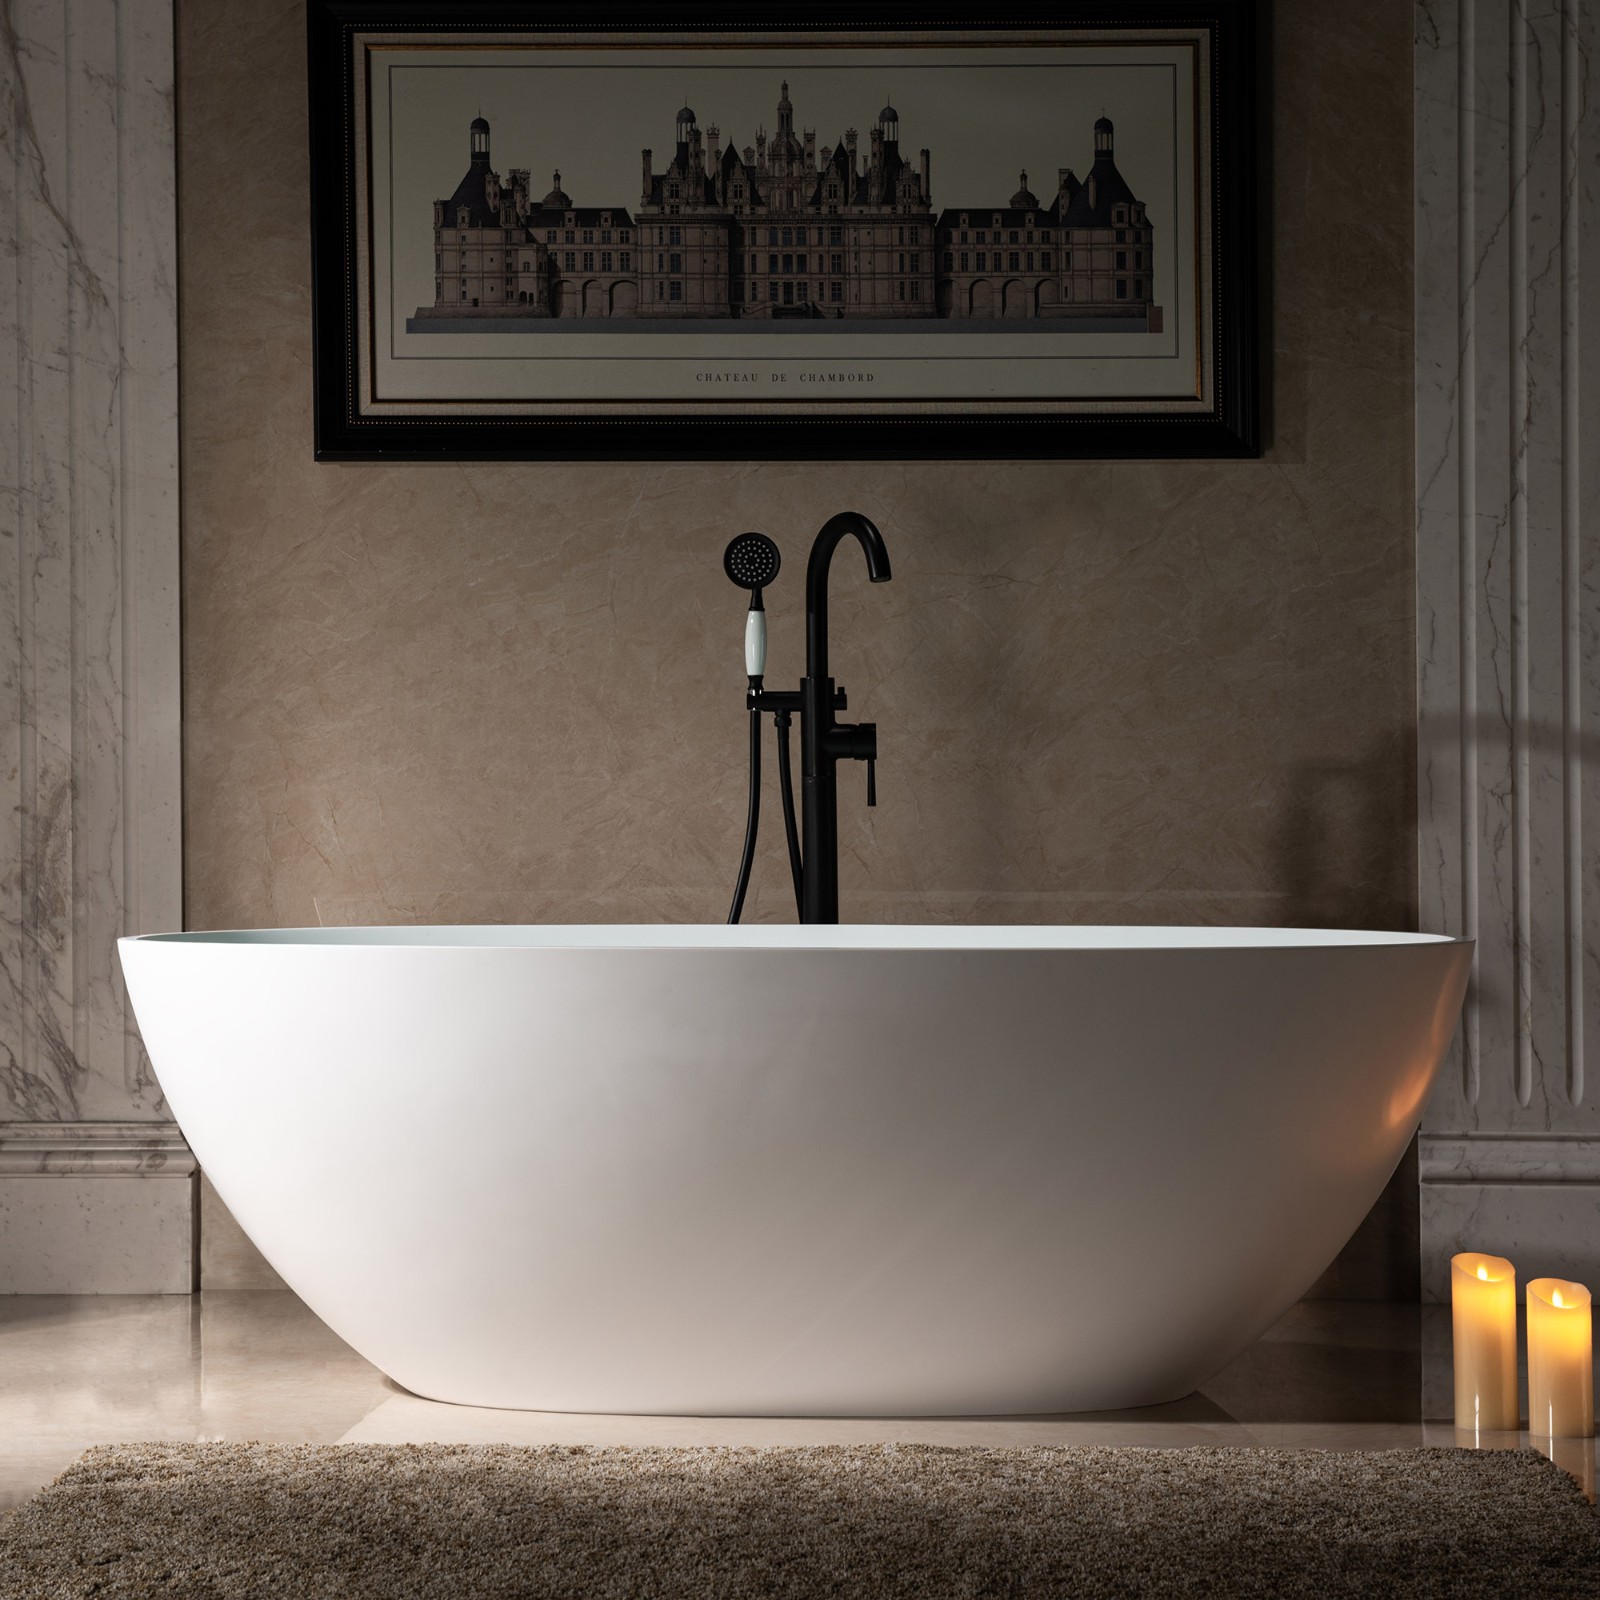  WOODBRIDGE 67 in. x 30.75 in. Luxury Contemporary Solid Surface Freestanding Bathtub in Matte White_605